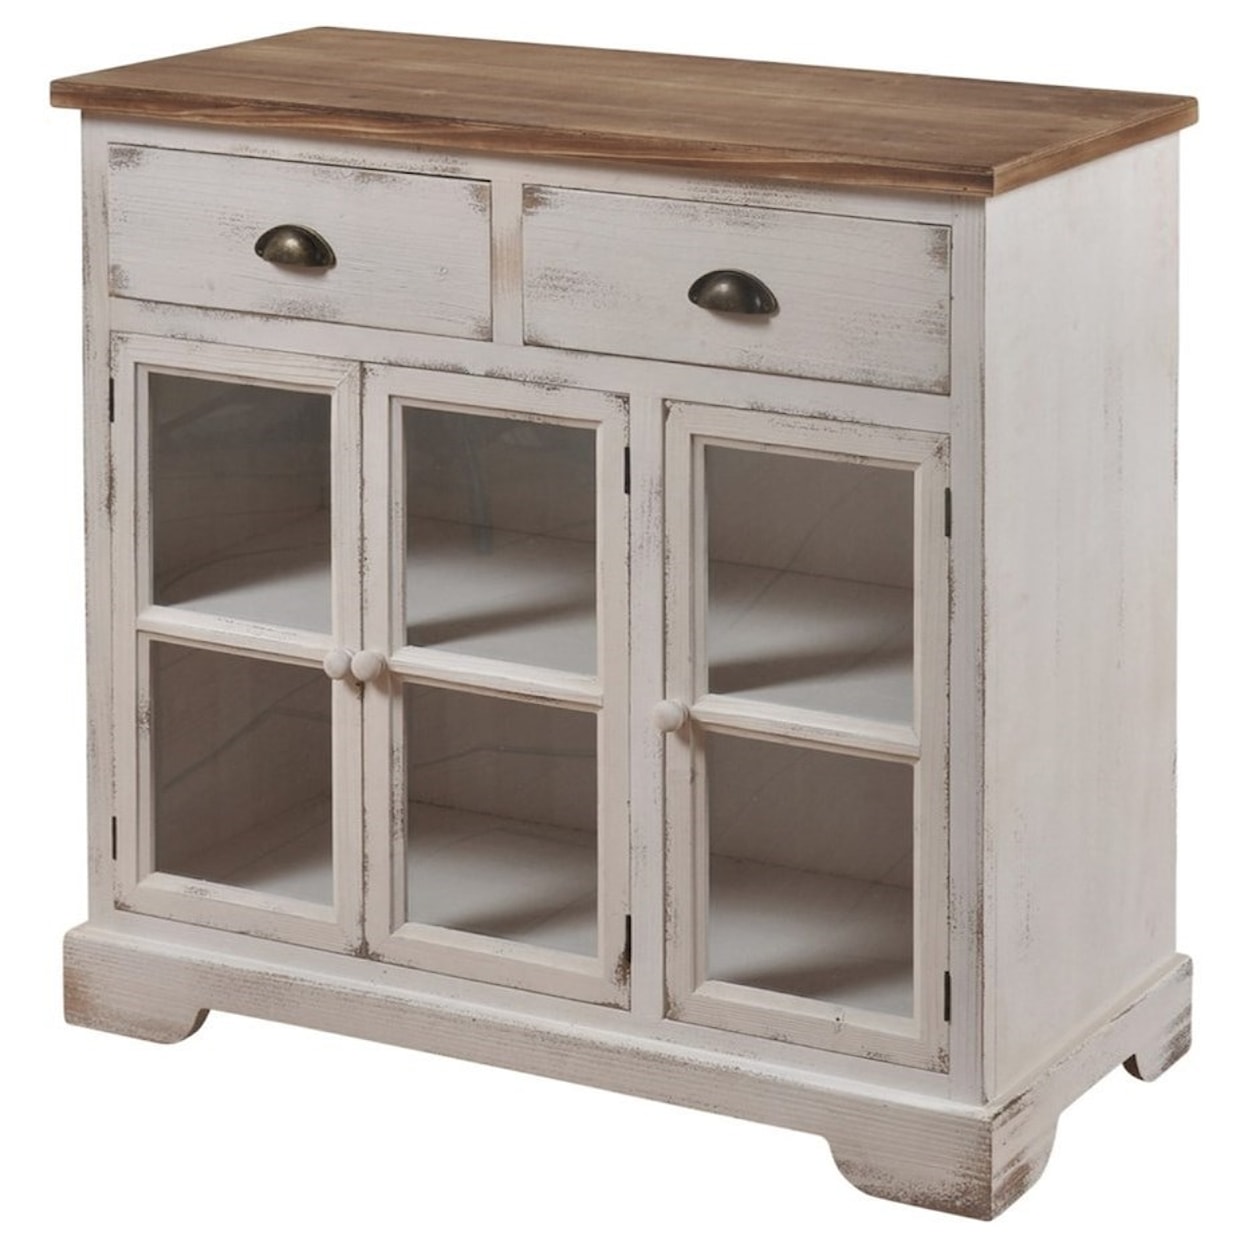 StyleCraft Occasional Cabinets Shabby Chic 3 Door 2 Drawer Cabinet